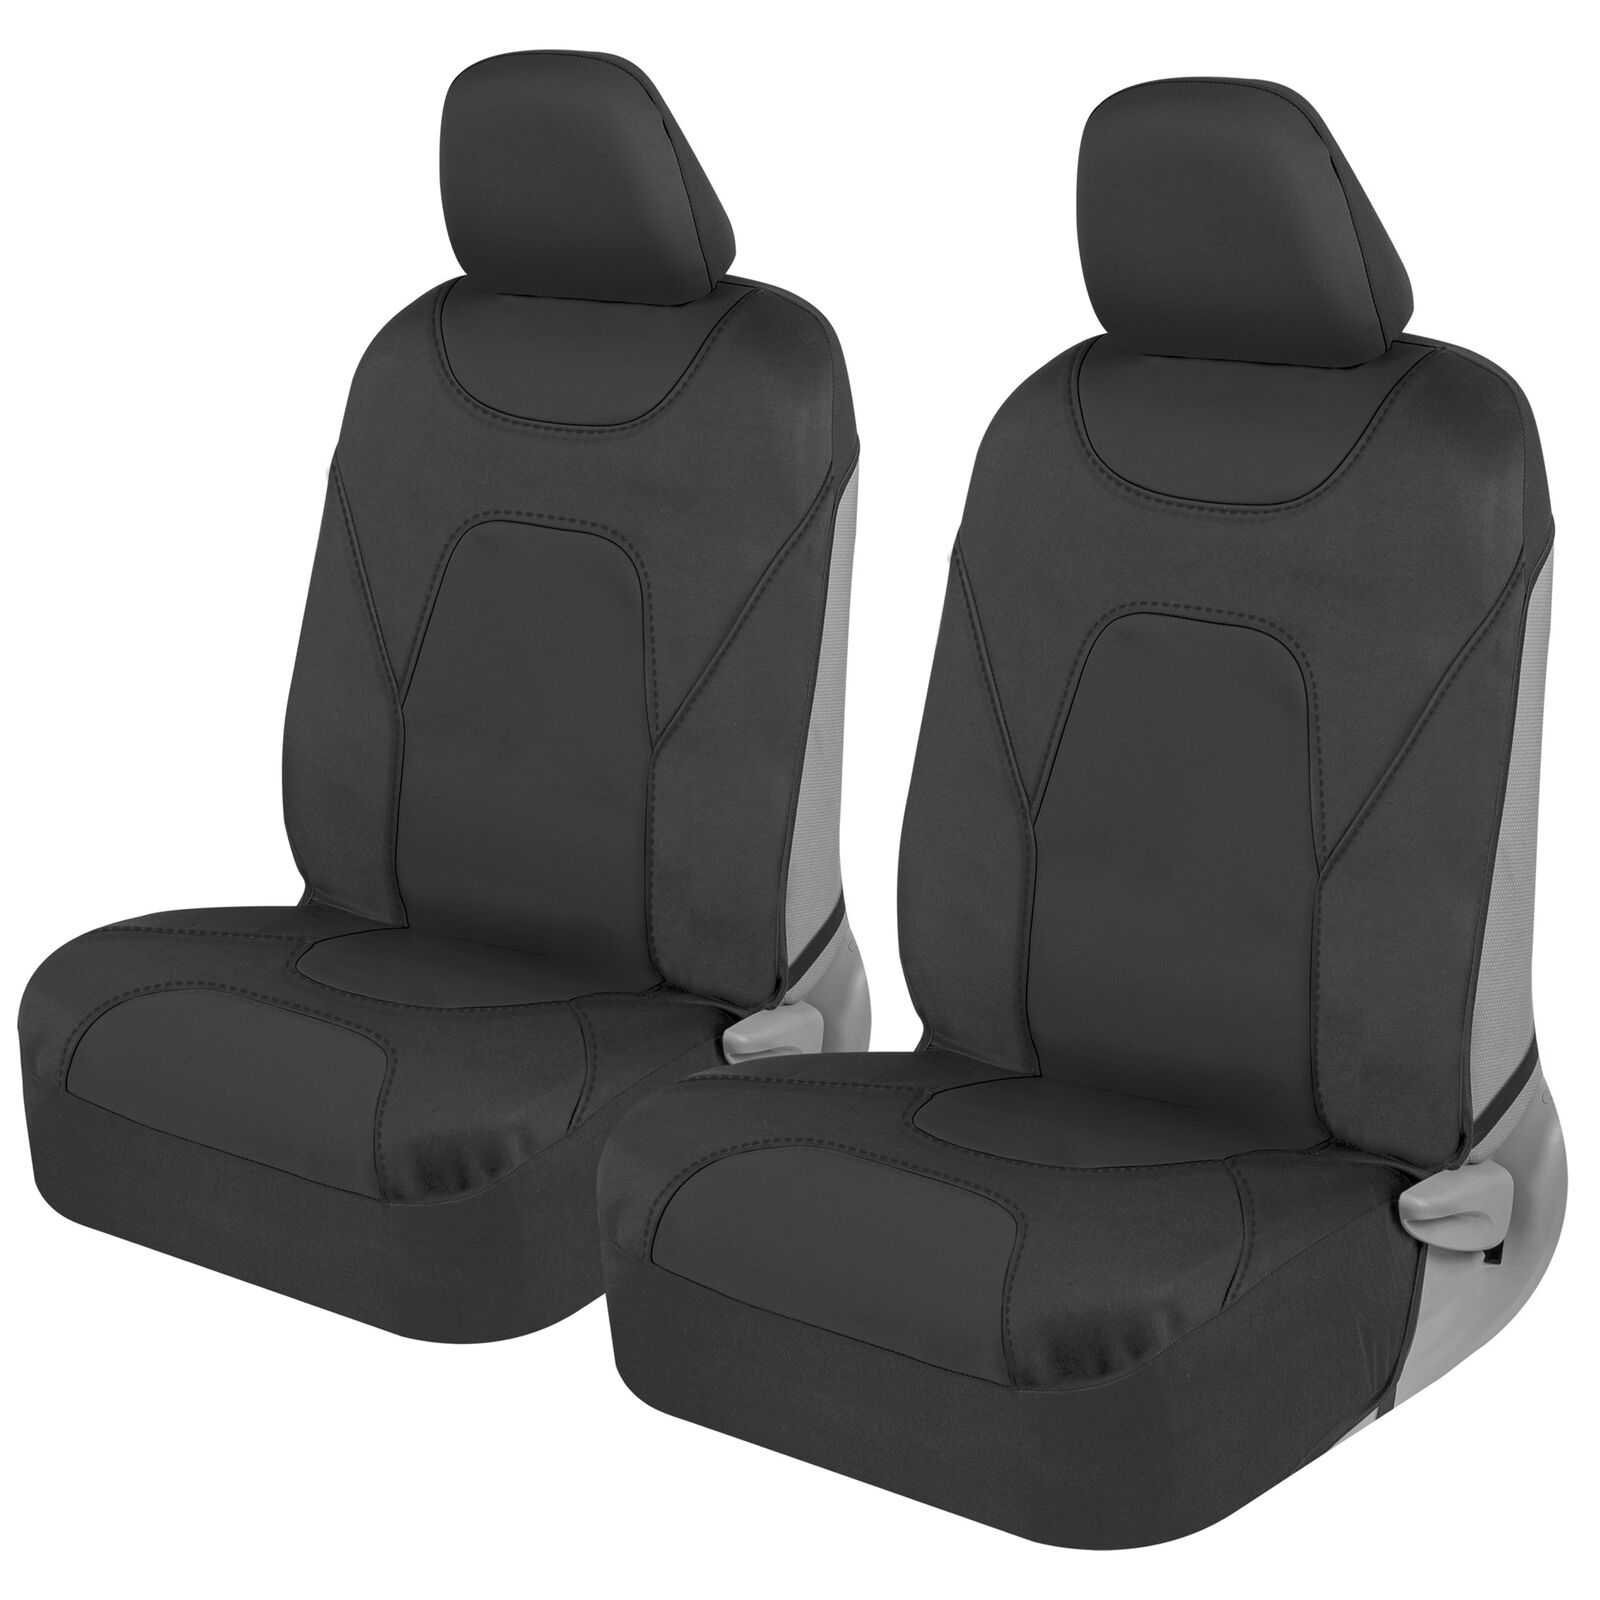 3 Layer Waterproof Seat Covers for Car Truck SUV Auto Sideless Black 2 Front